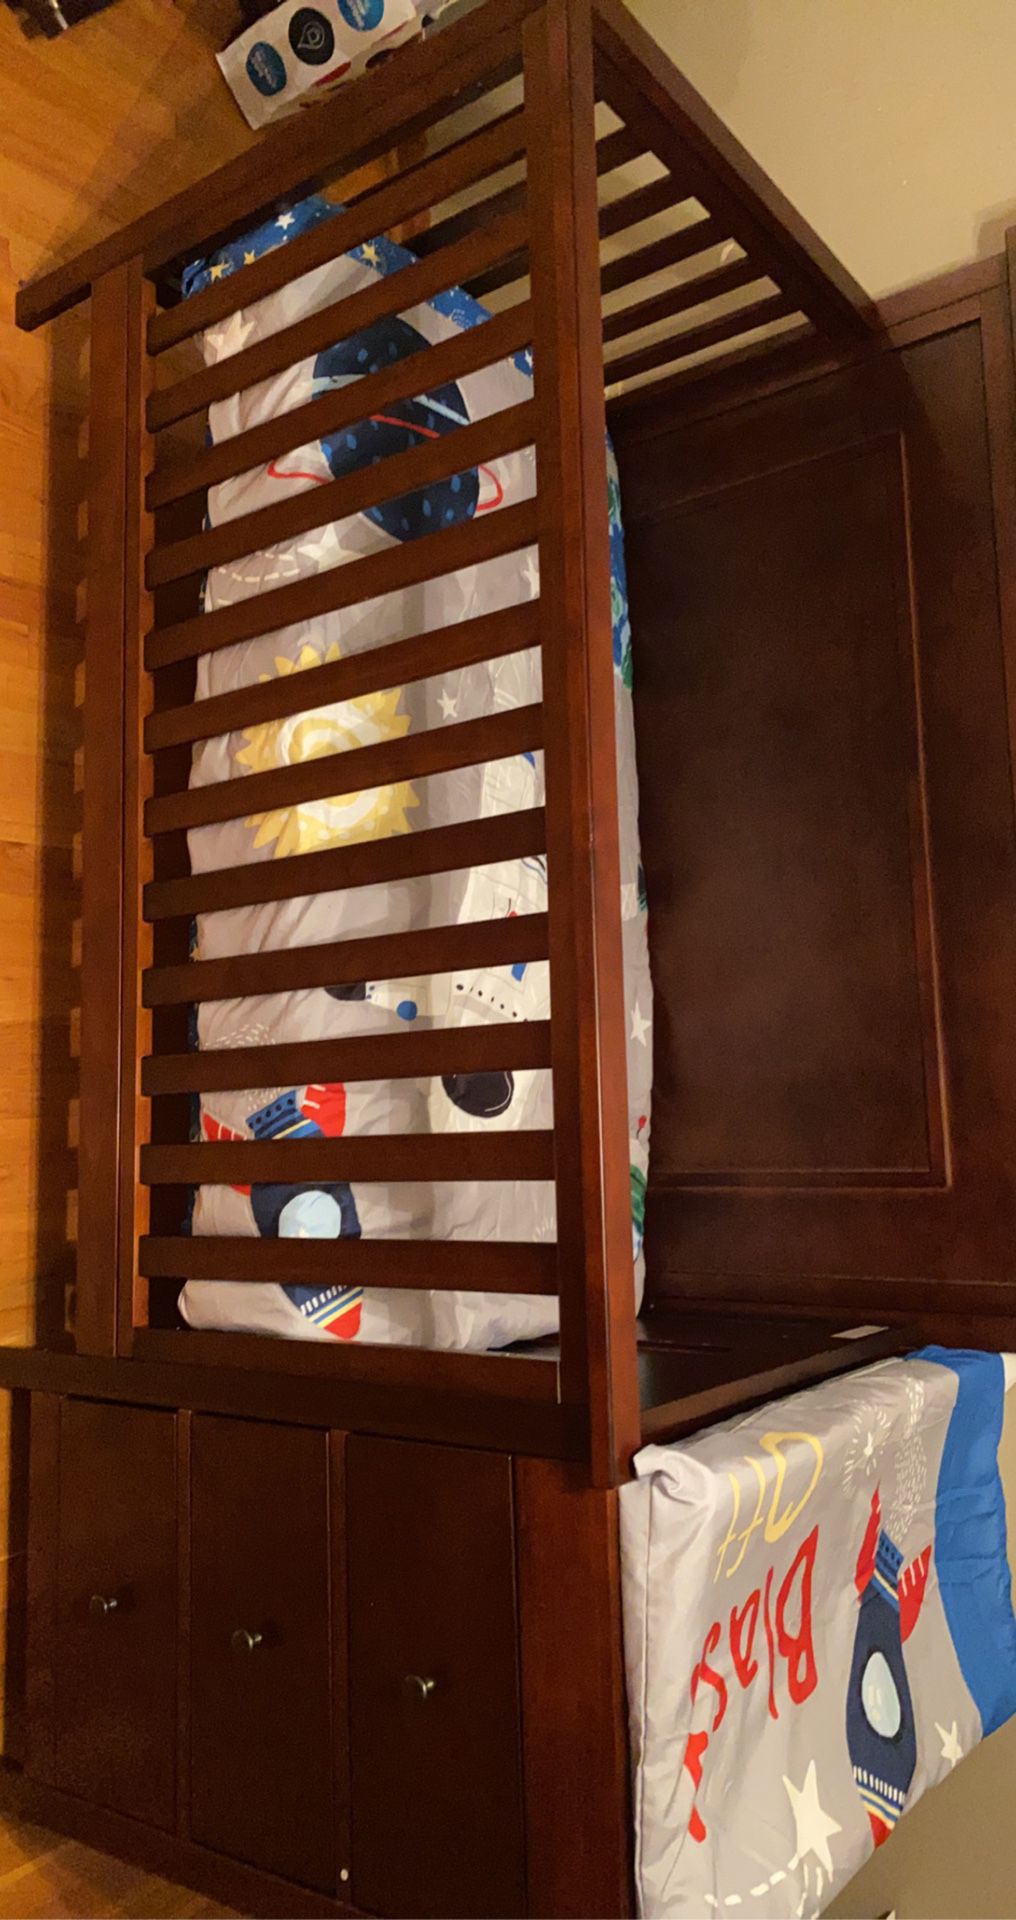 4 In 1 Crib With Changing Table